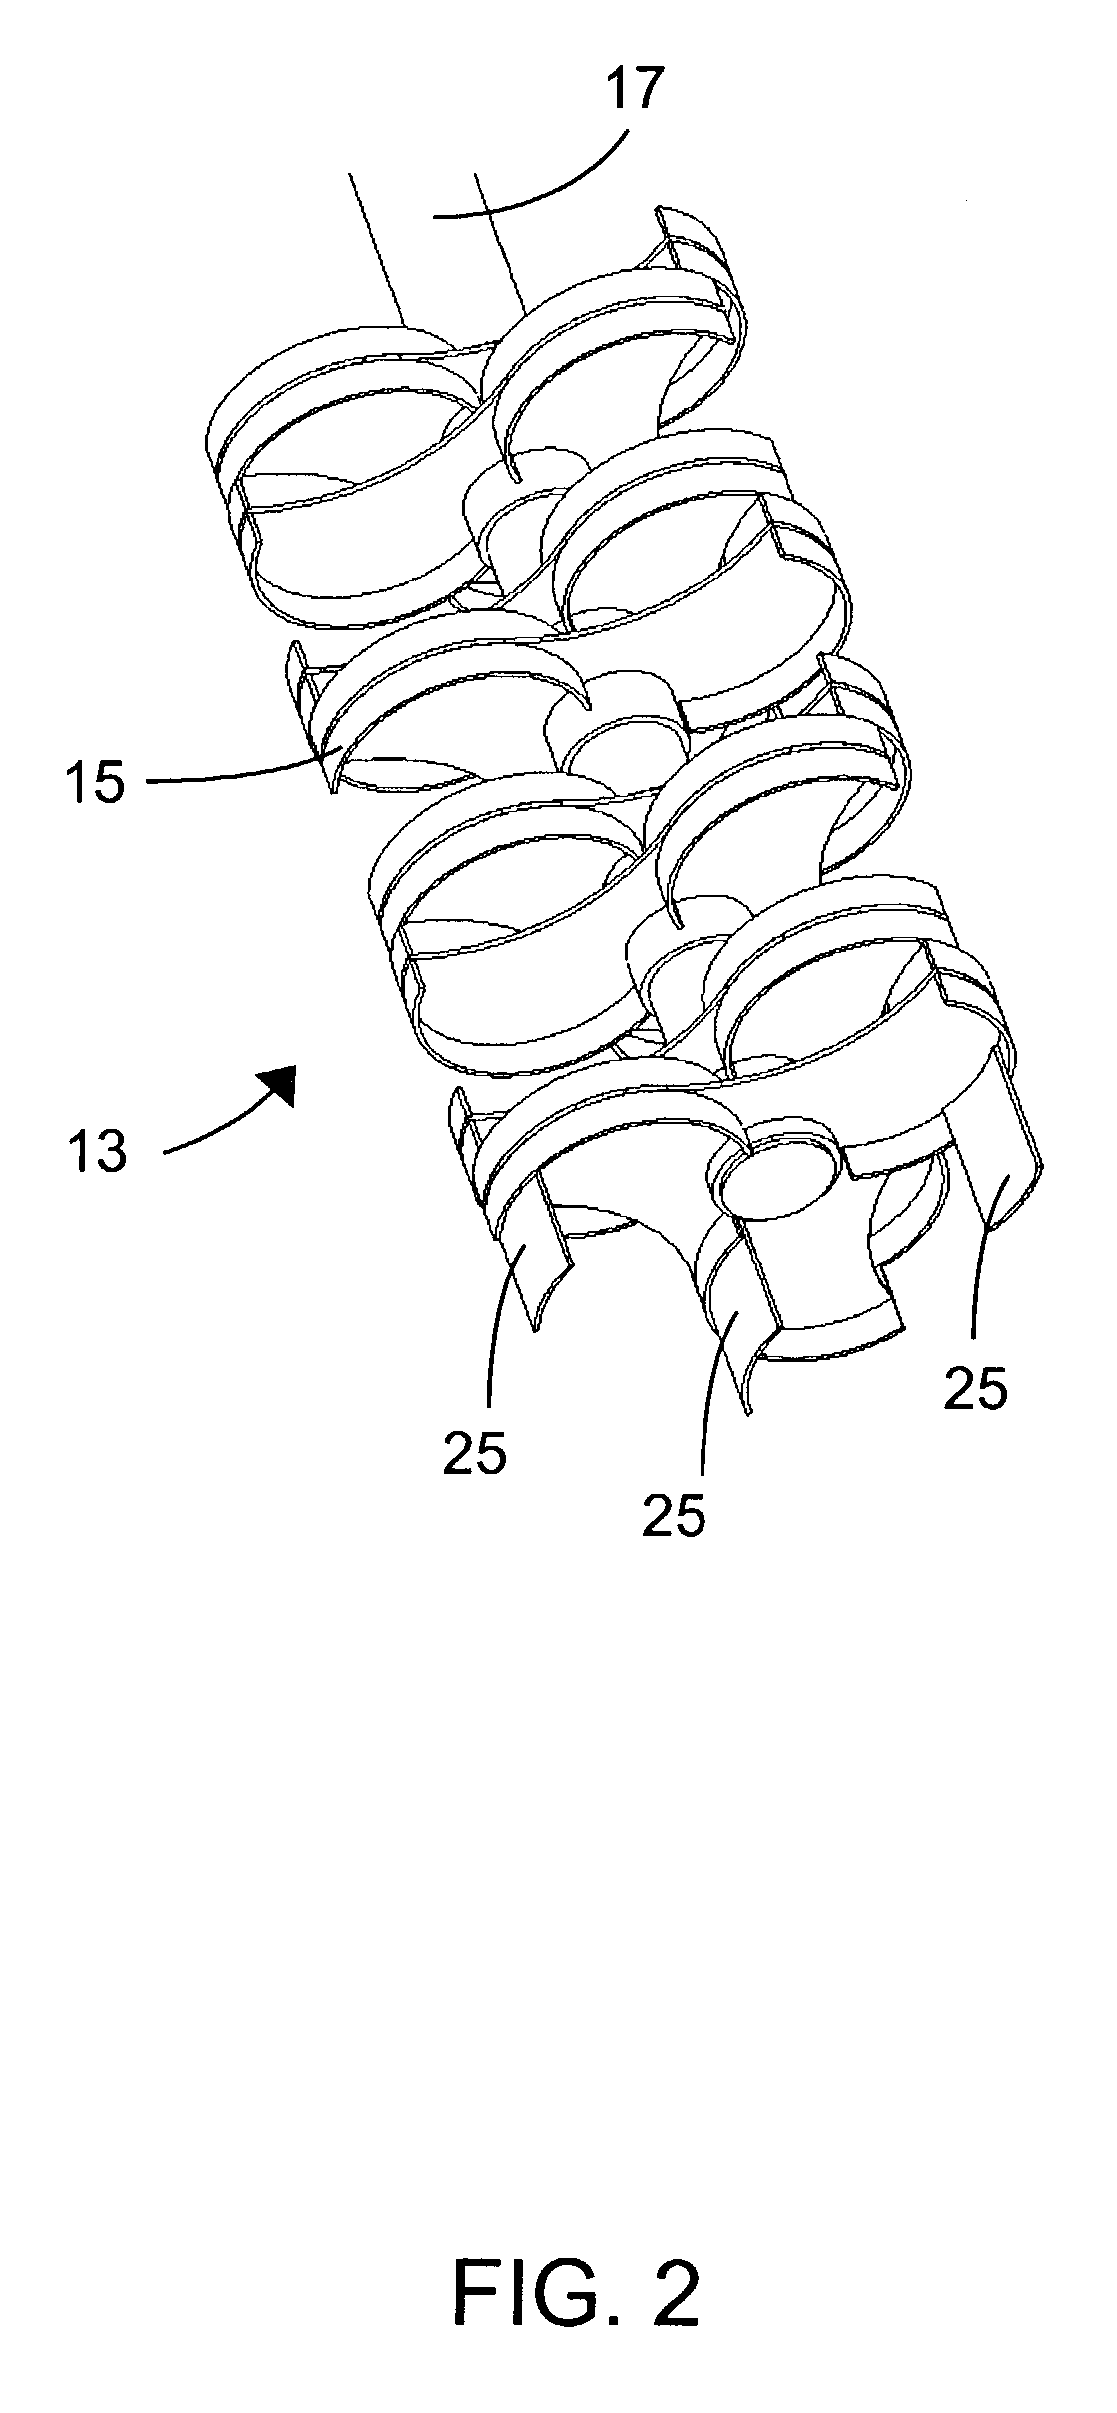 Methods and apparatus for homogenizing molten glass